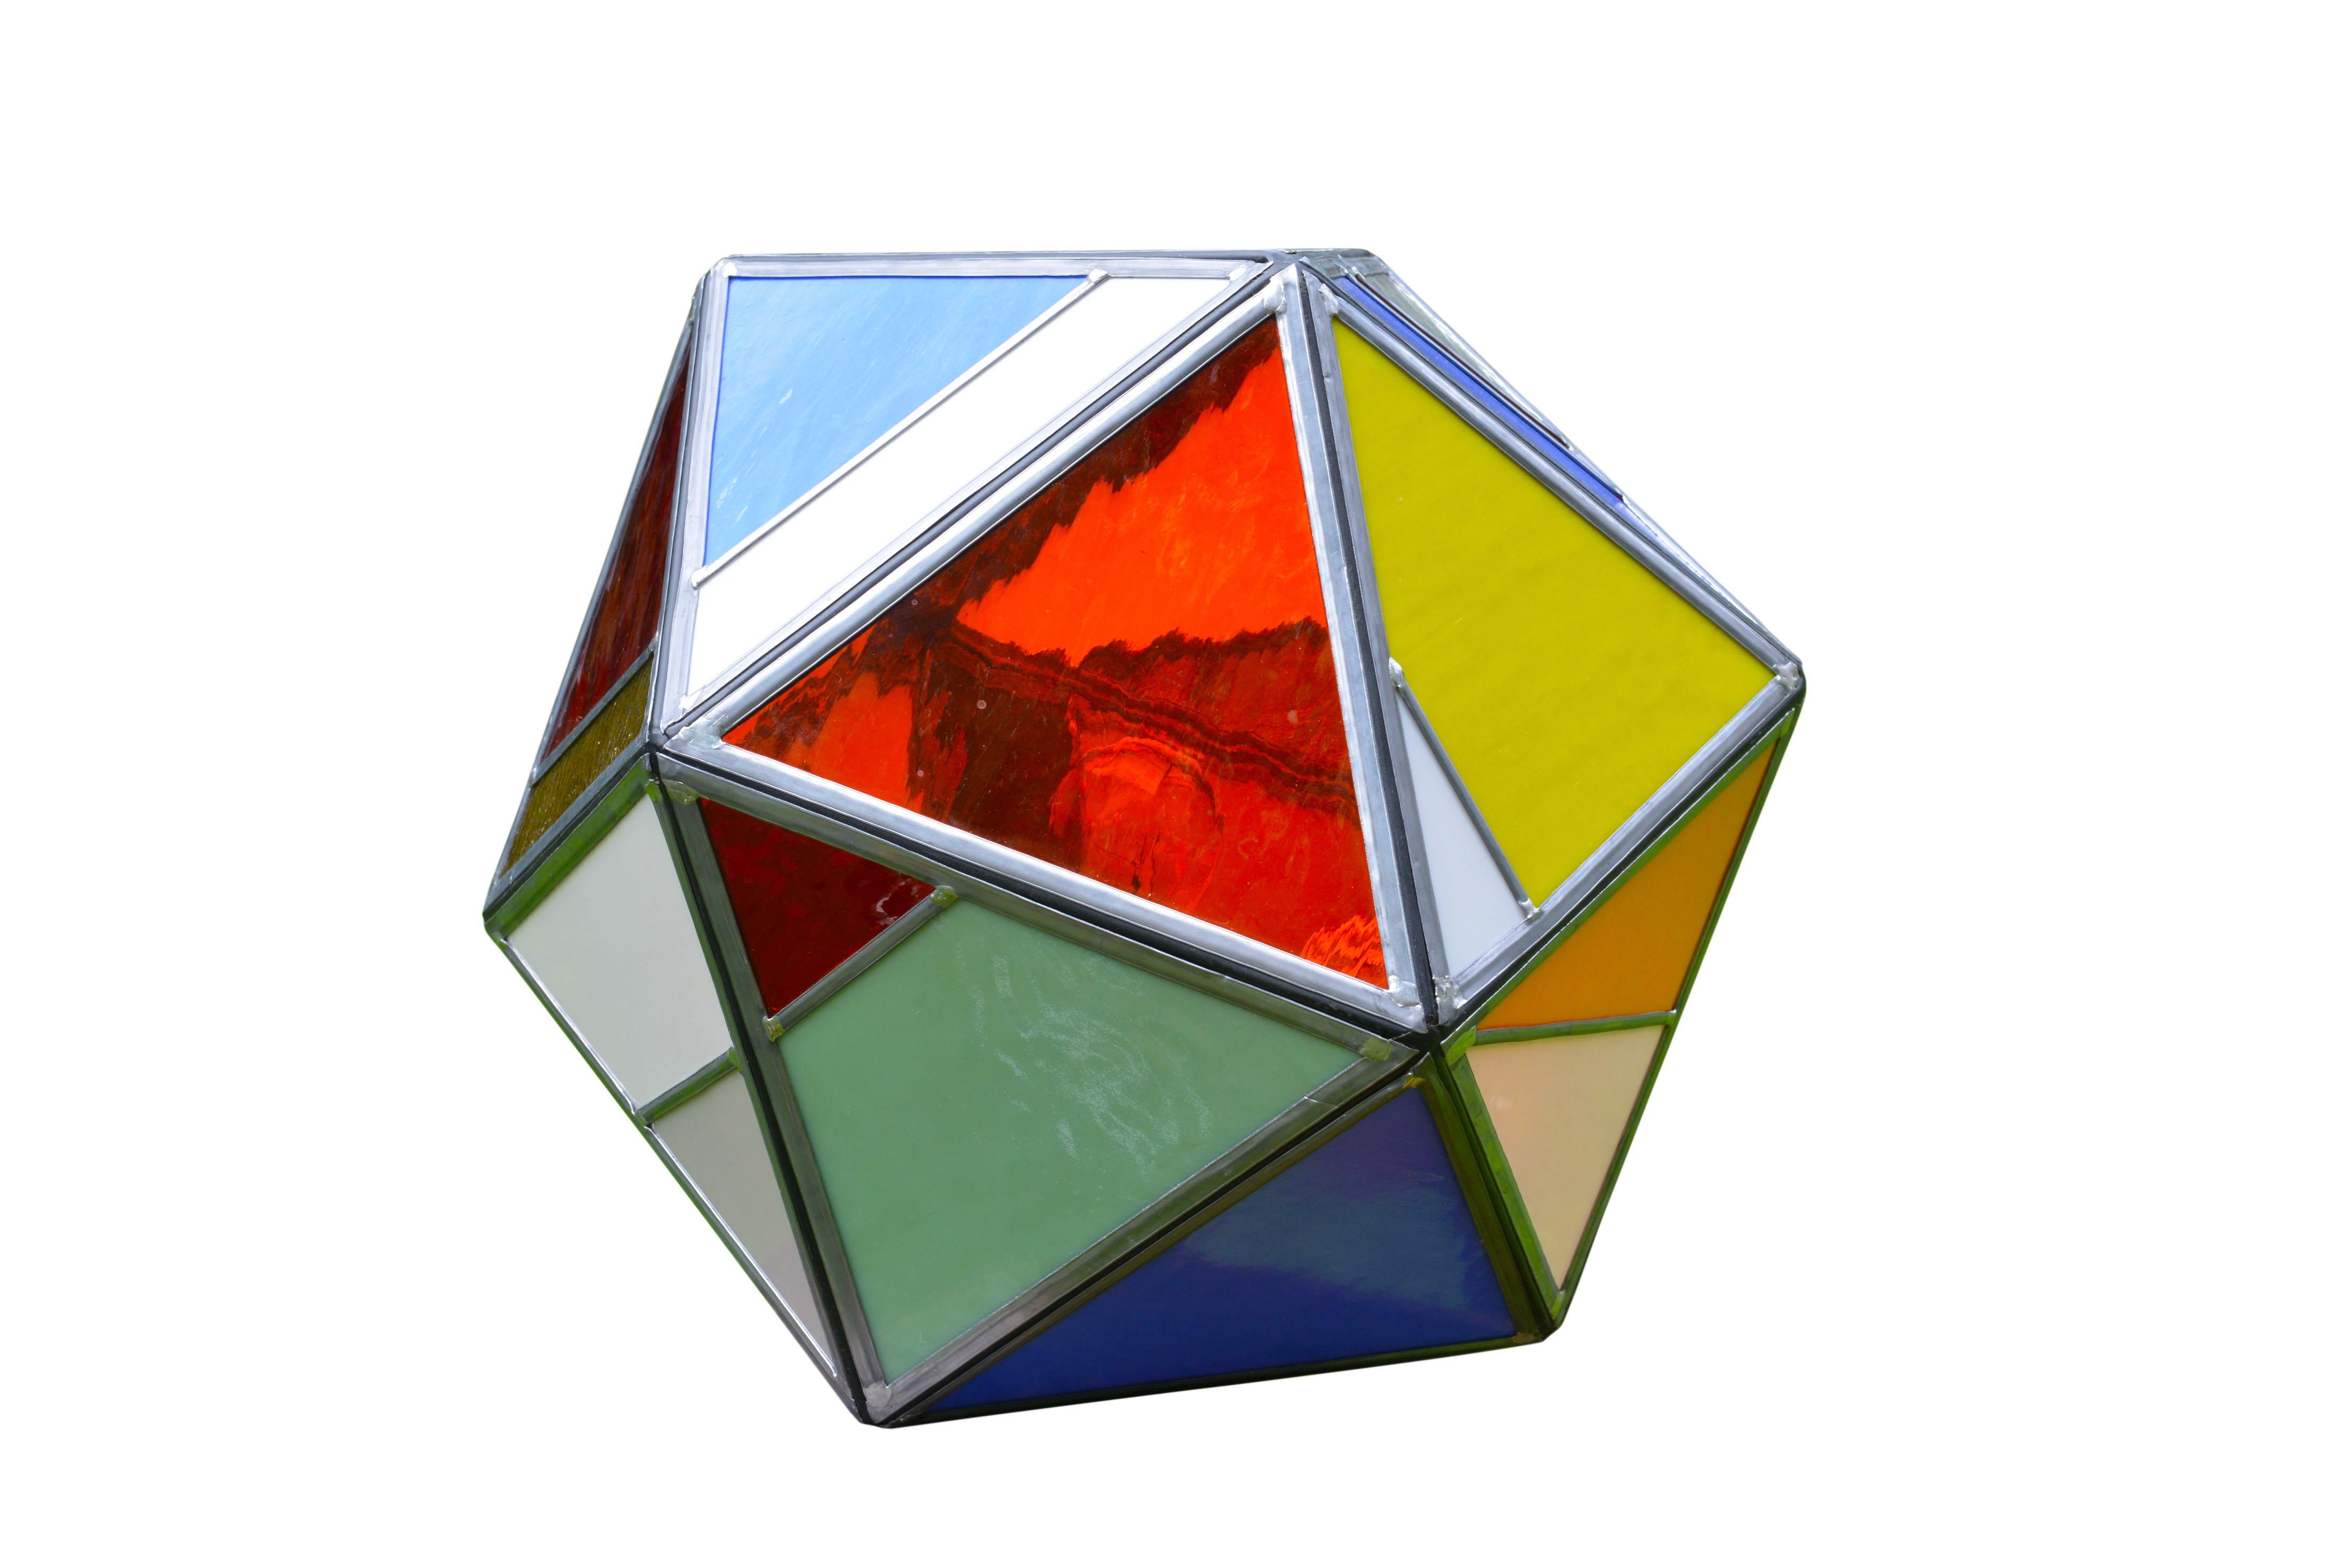 Polyhedral Belgian Colored Glass Lamp Made by Local Bruges Artist For Sale 4